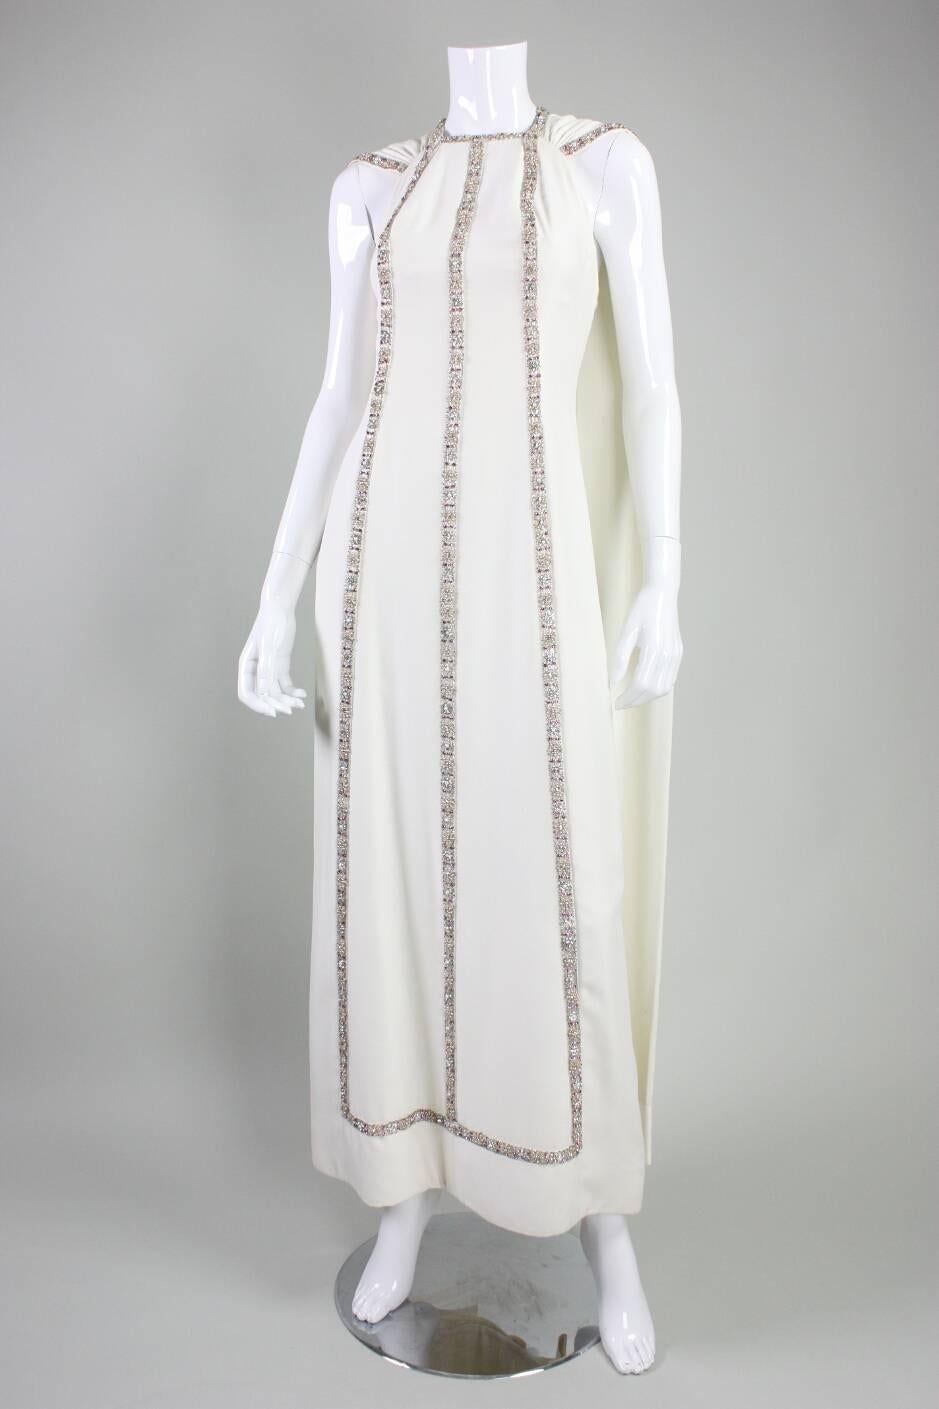 Vintage gown and cape from Italian couture house Gattinoni dates to the mid 1960’s.  Gown is made of cream four ply silk and is adorned with exquisite trim made of woven raffia, rhinestones, faux pearls and beads.  Floor length textured pink cape